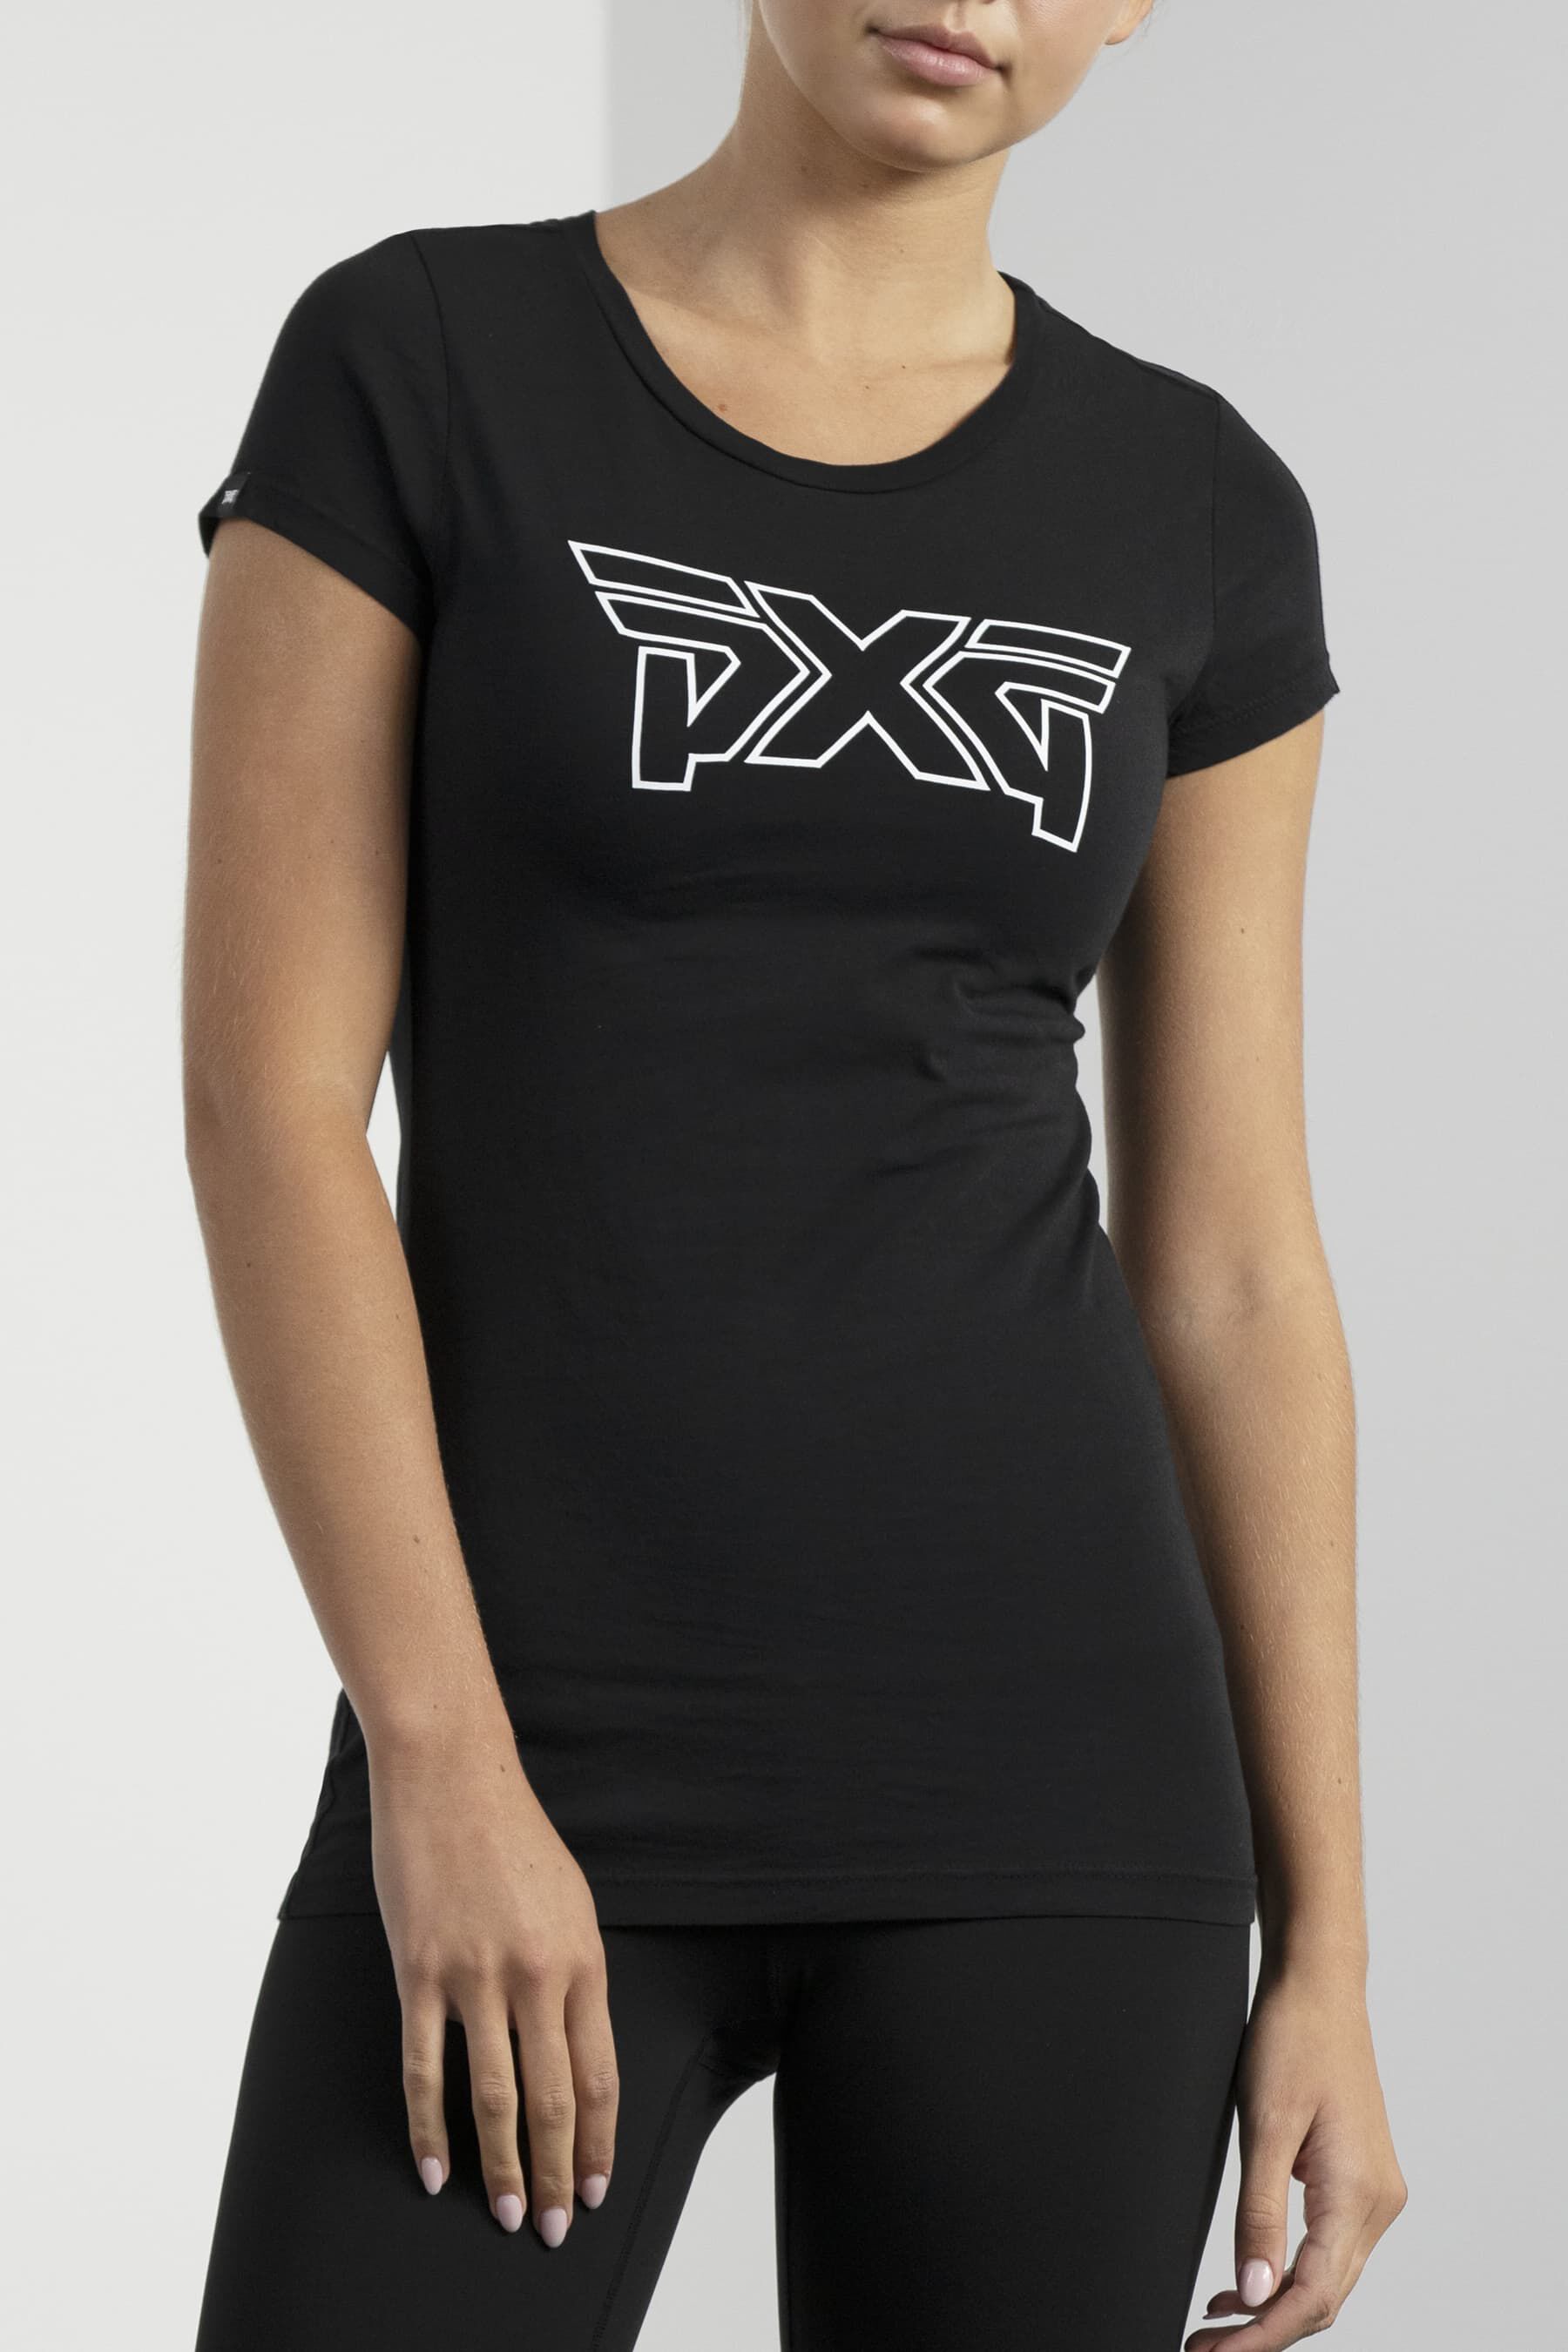 PXG Outline Tee Shop the Highest Quality Golf Apparel, Gear, Accessories and Golf Clubs at PXG